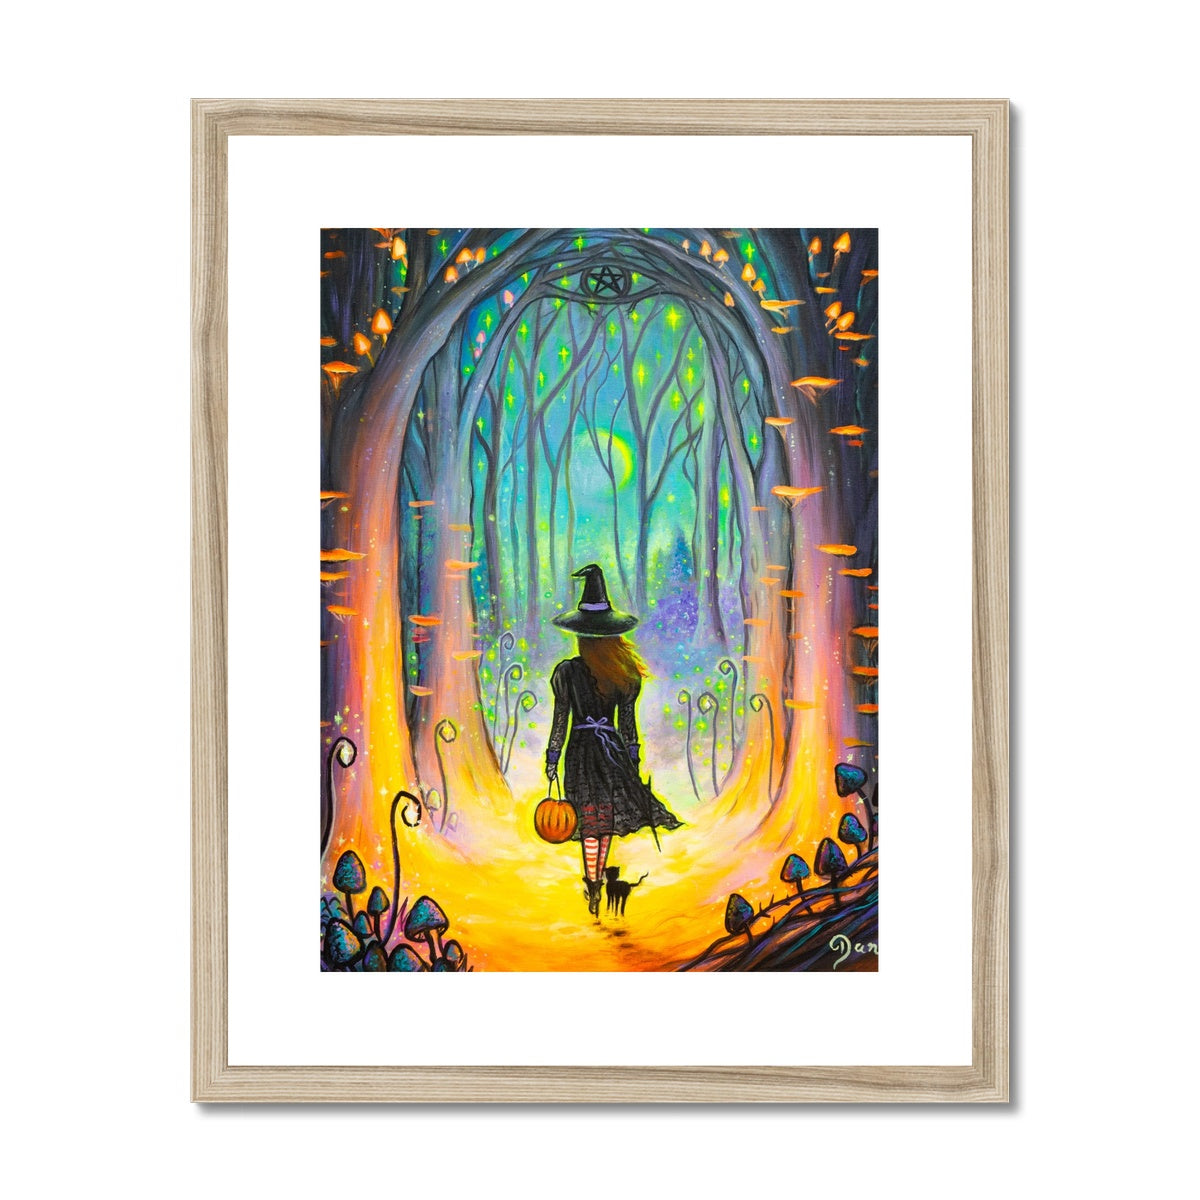 Into The Forest I Go  Framed & Mounted Print